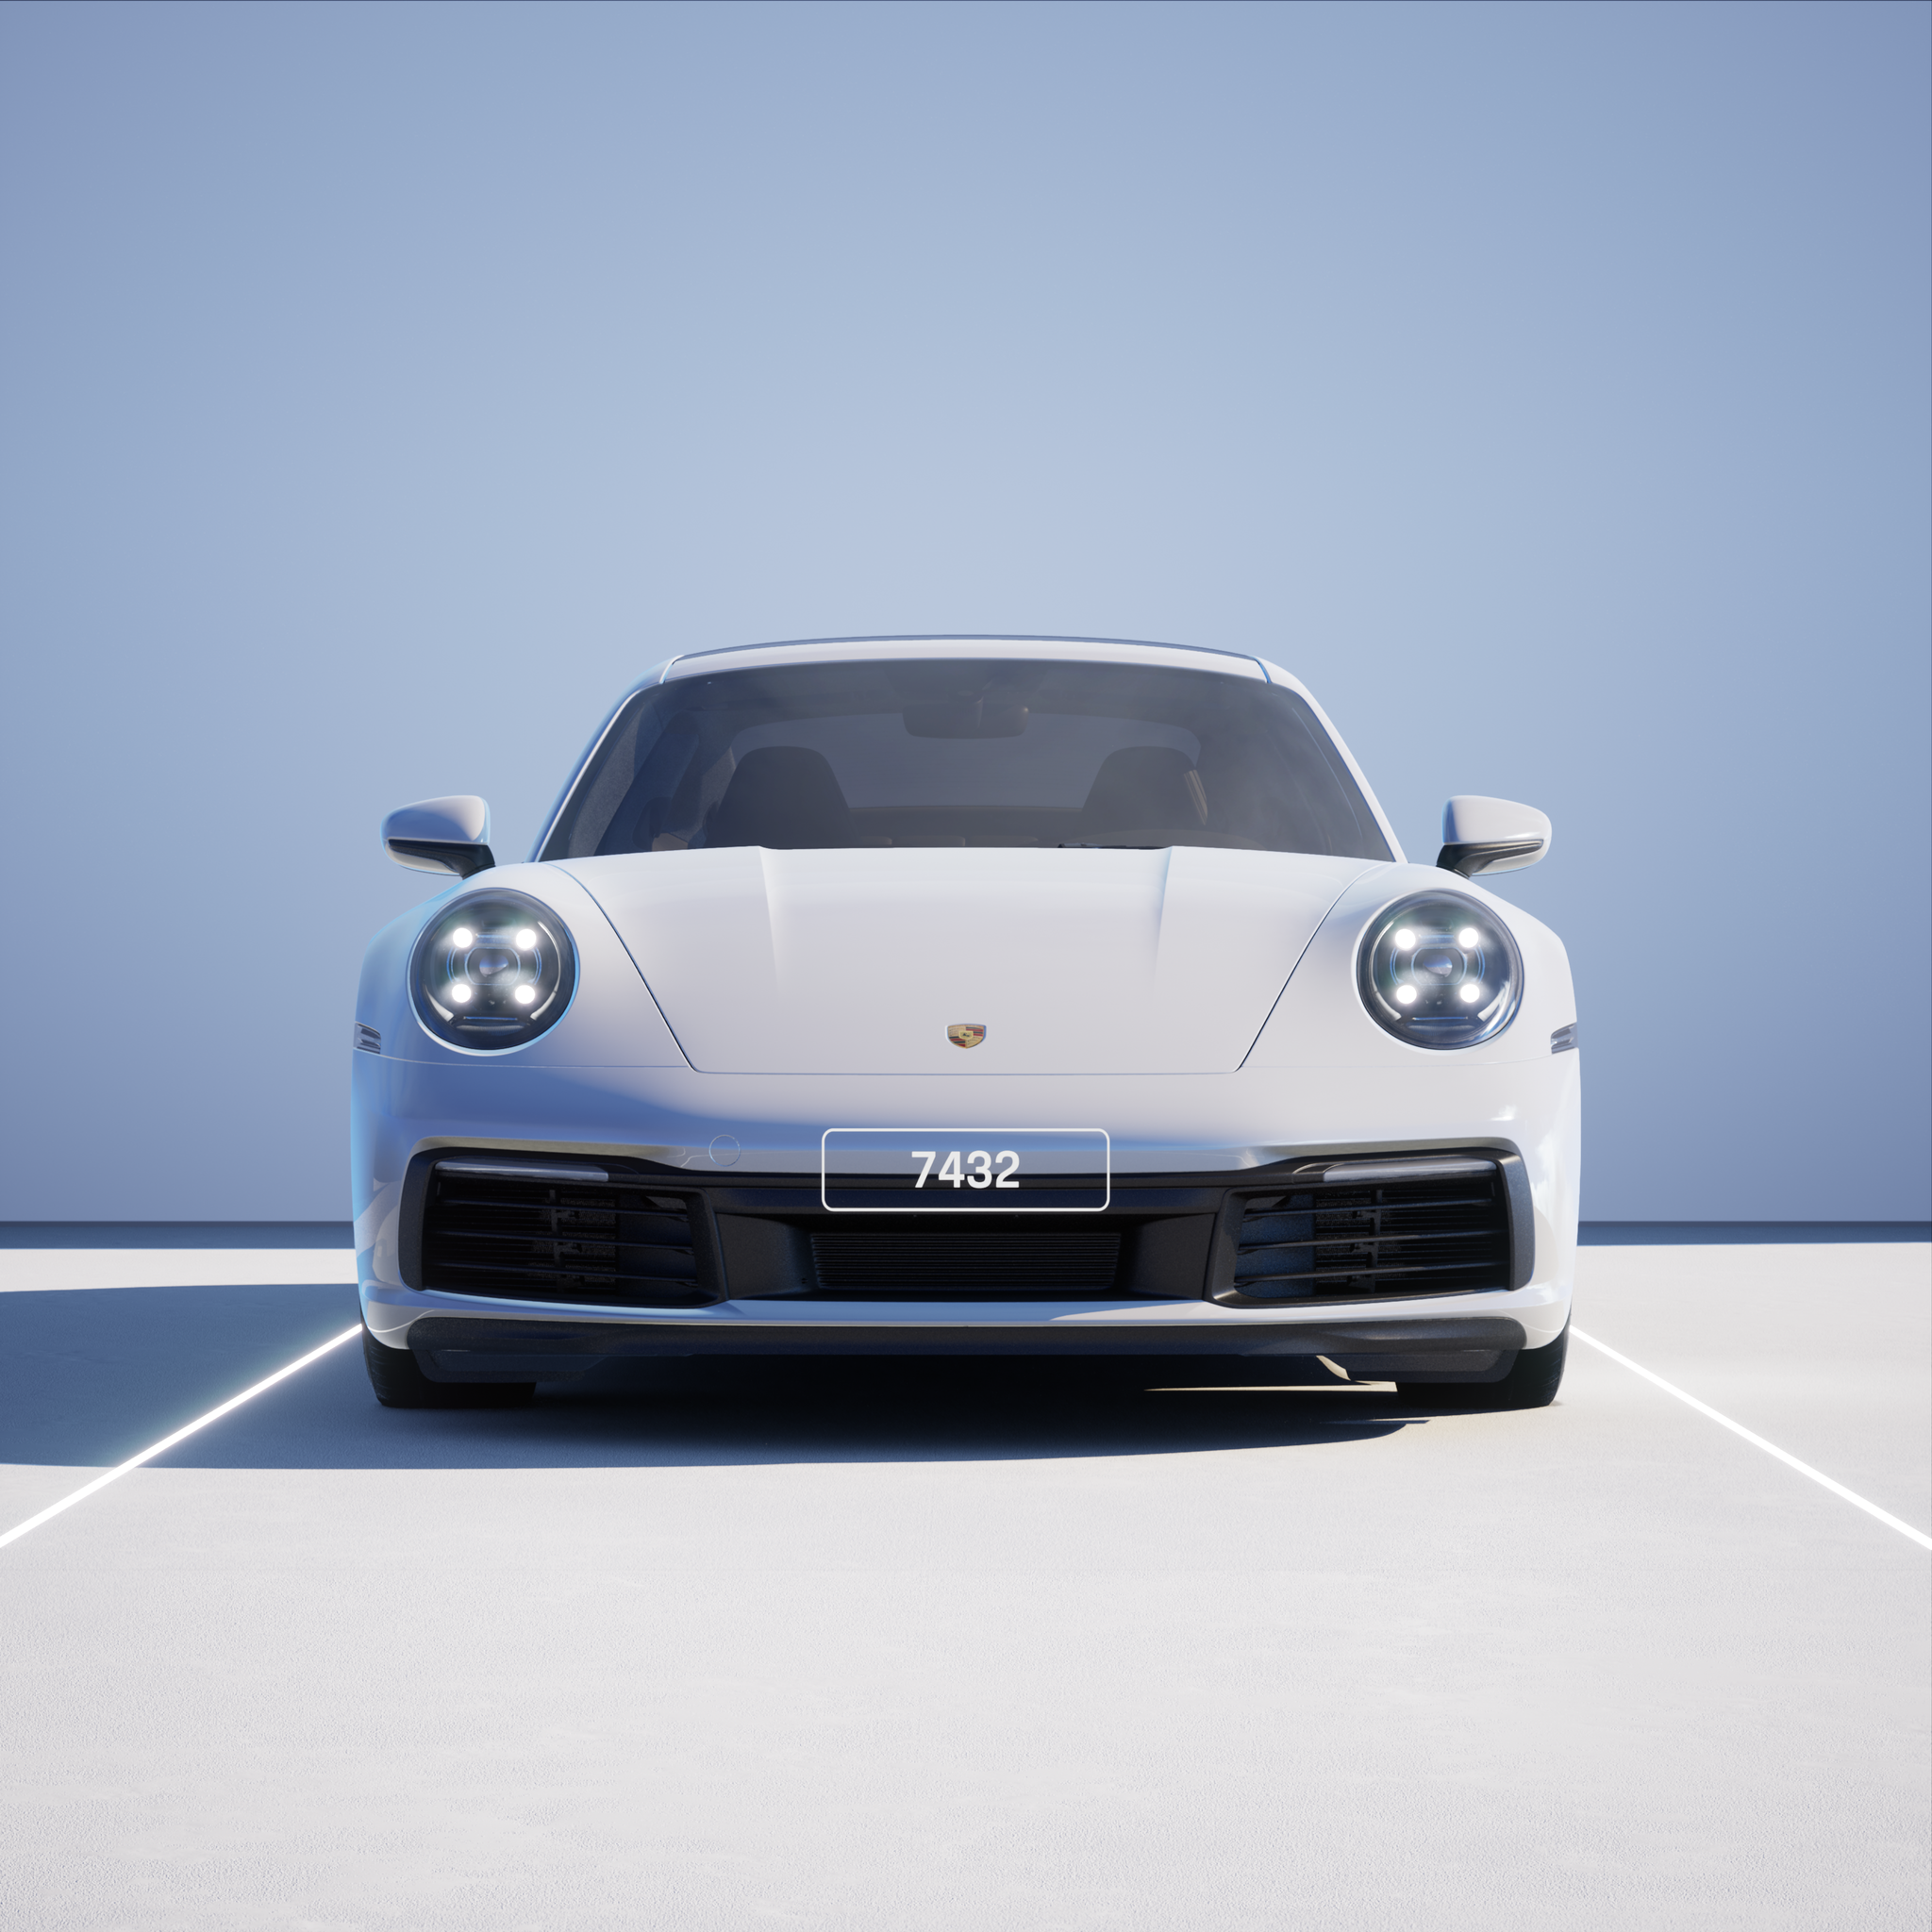 The PORSCHΞ 911 7432 image in phase